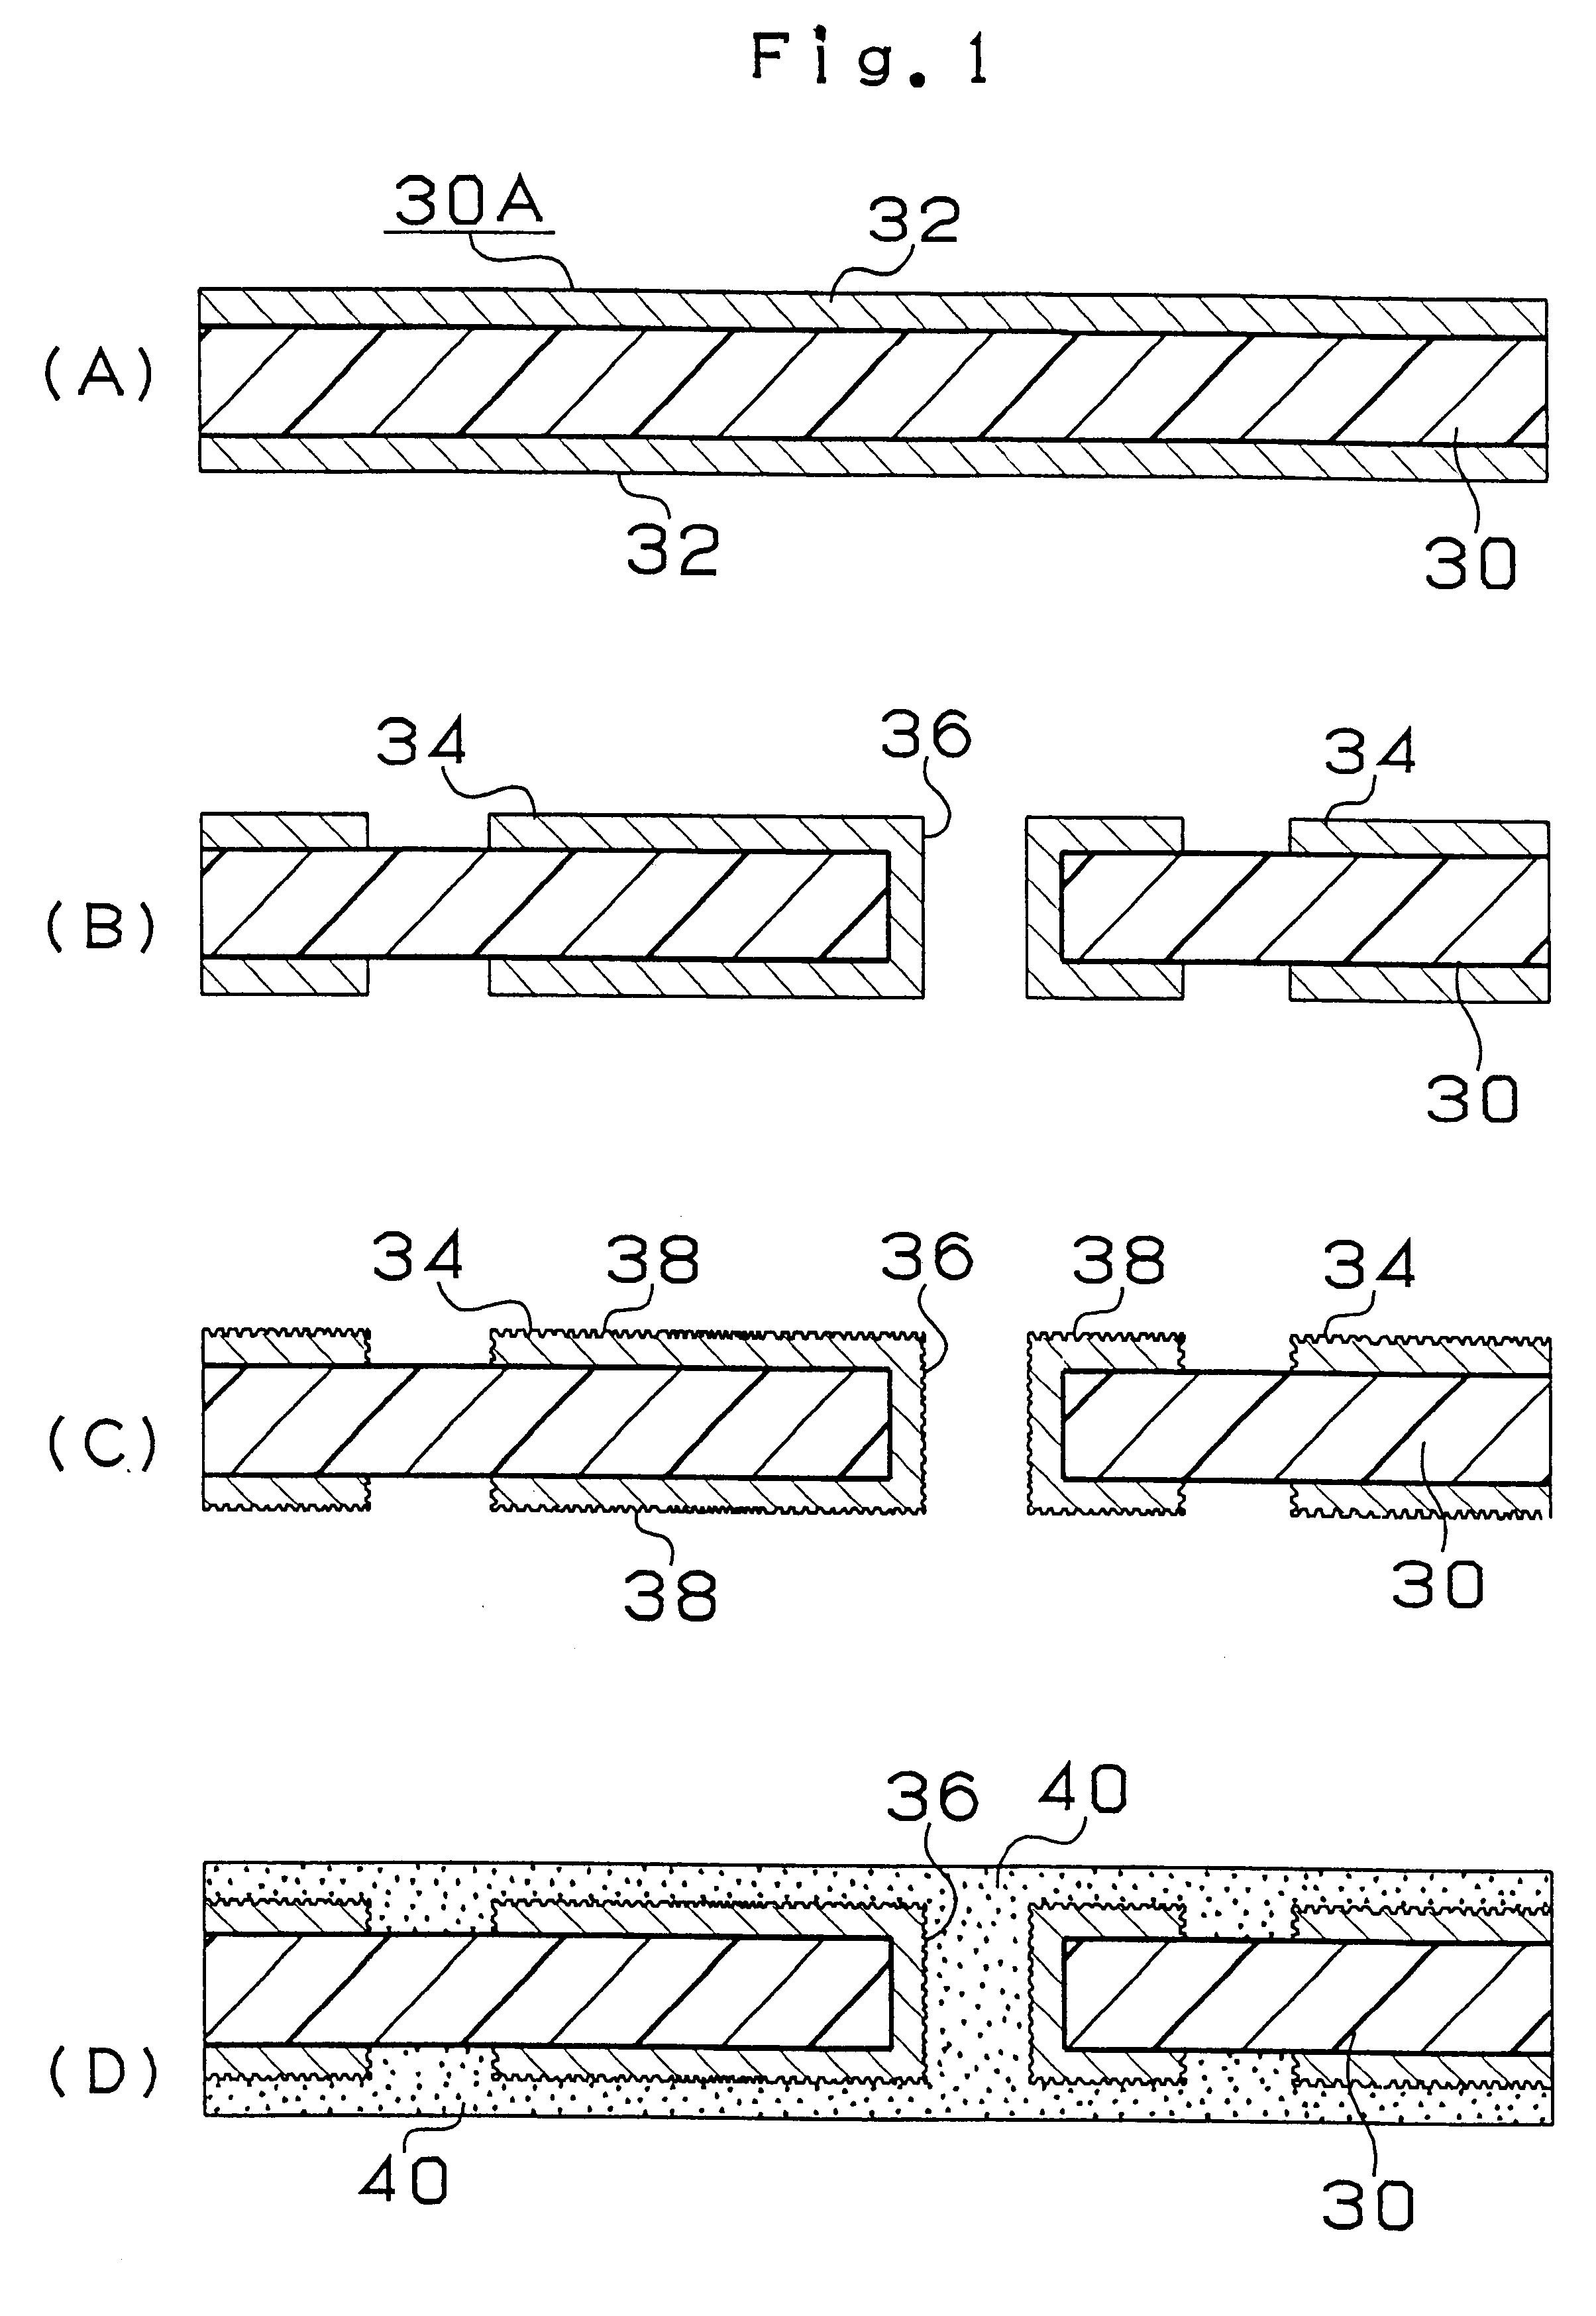 Manufacturing method of a multilayered printed circuit board having an opening made by a laser, and using electroless and electrolytic plating